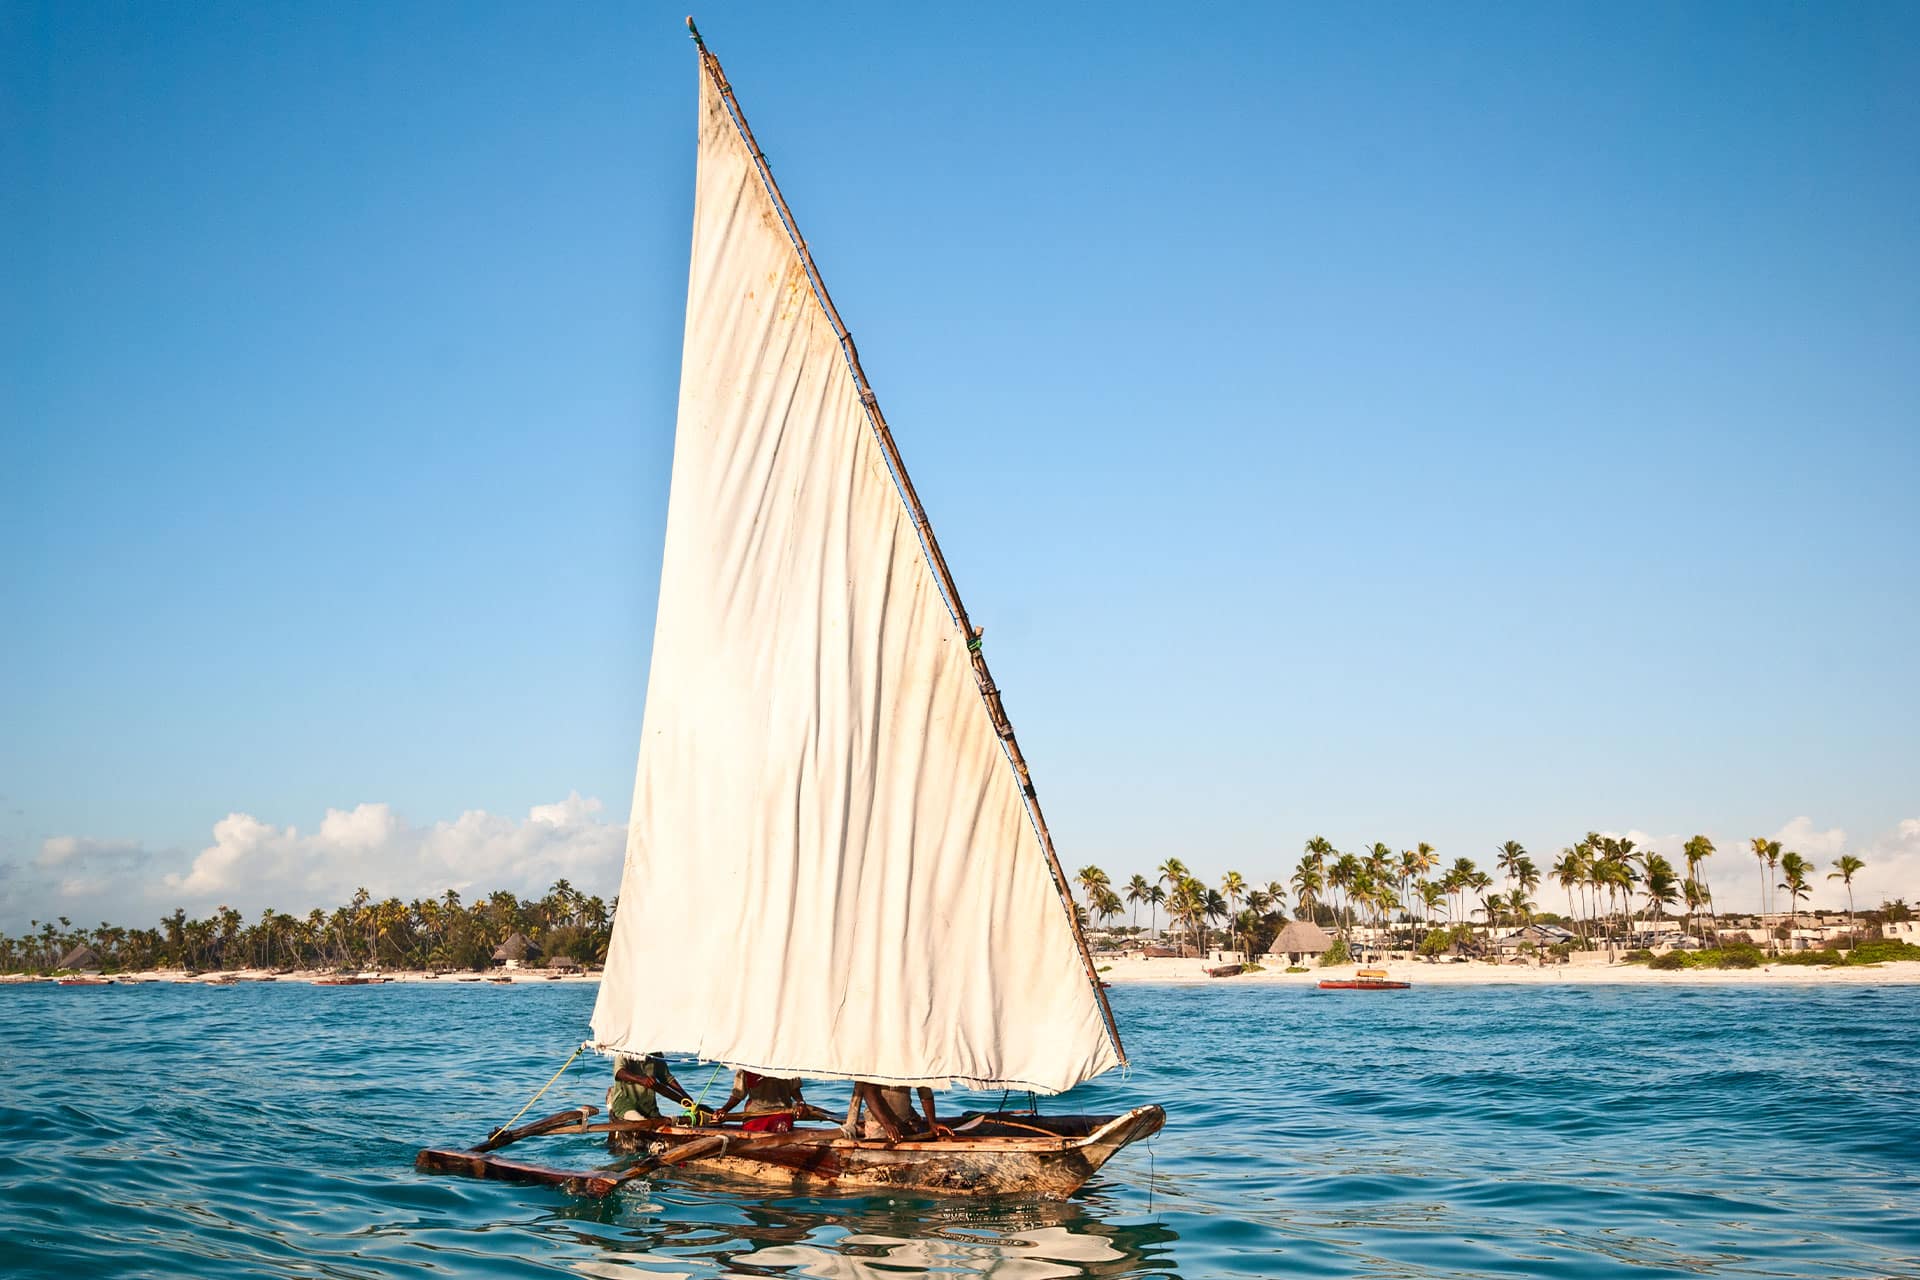 A dhow boat sailing on the waters in Zanzibar in East Africa